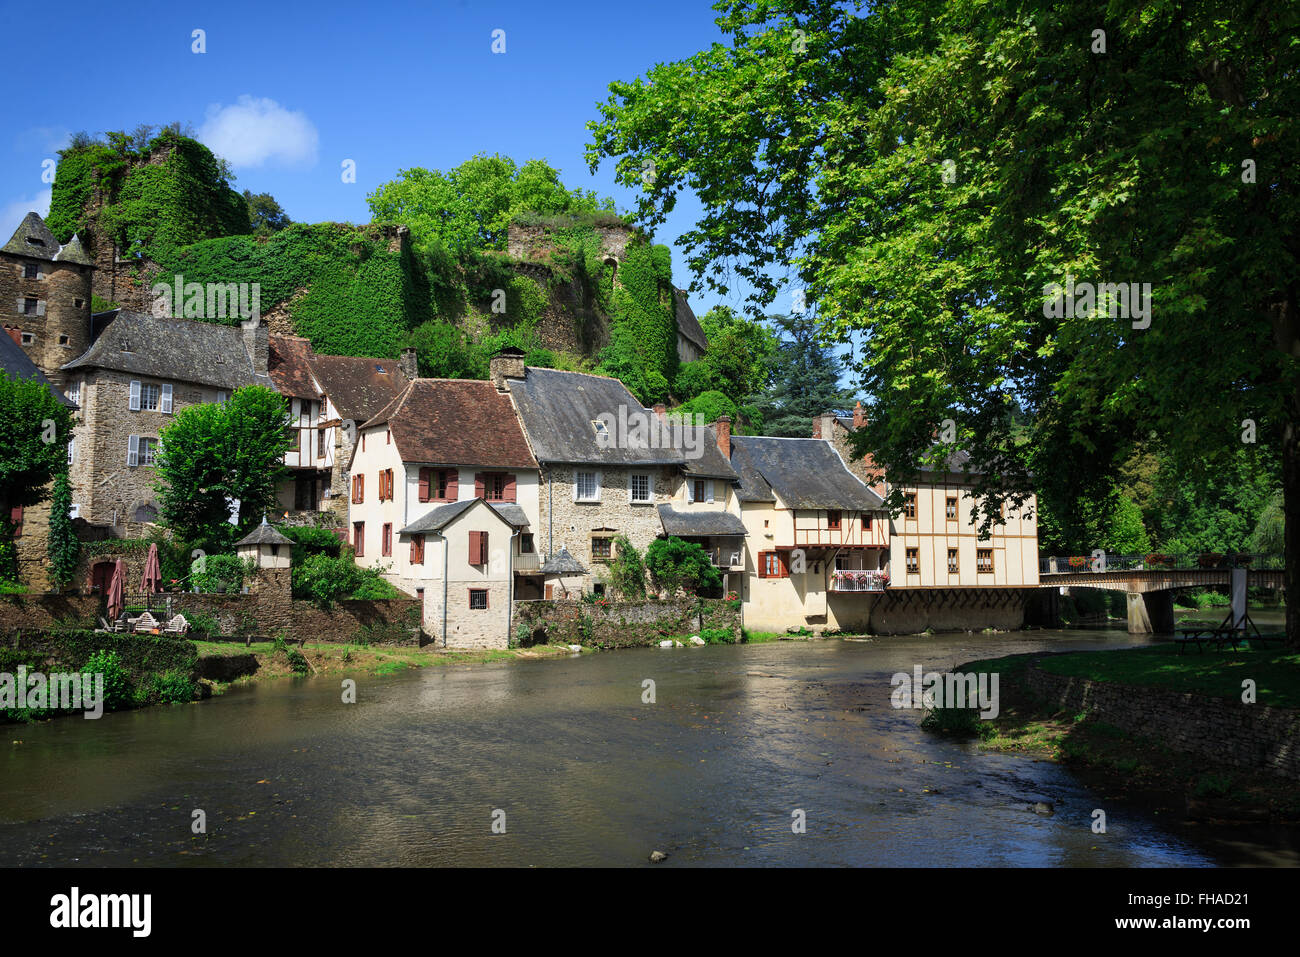 The medieval village of Segur-le-Chateau with half-timbered houses and a castle along Auvezere river in the Dordogne in France. Stock Photo